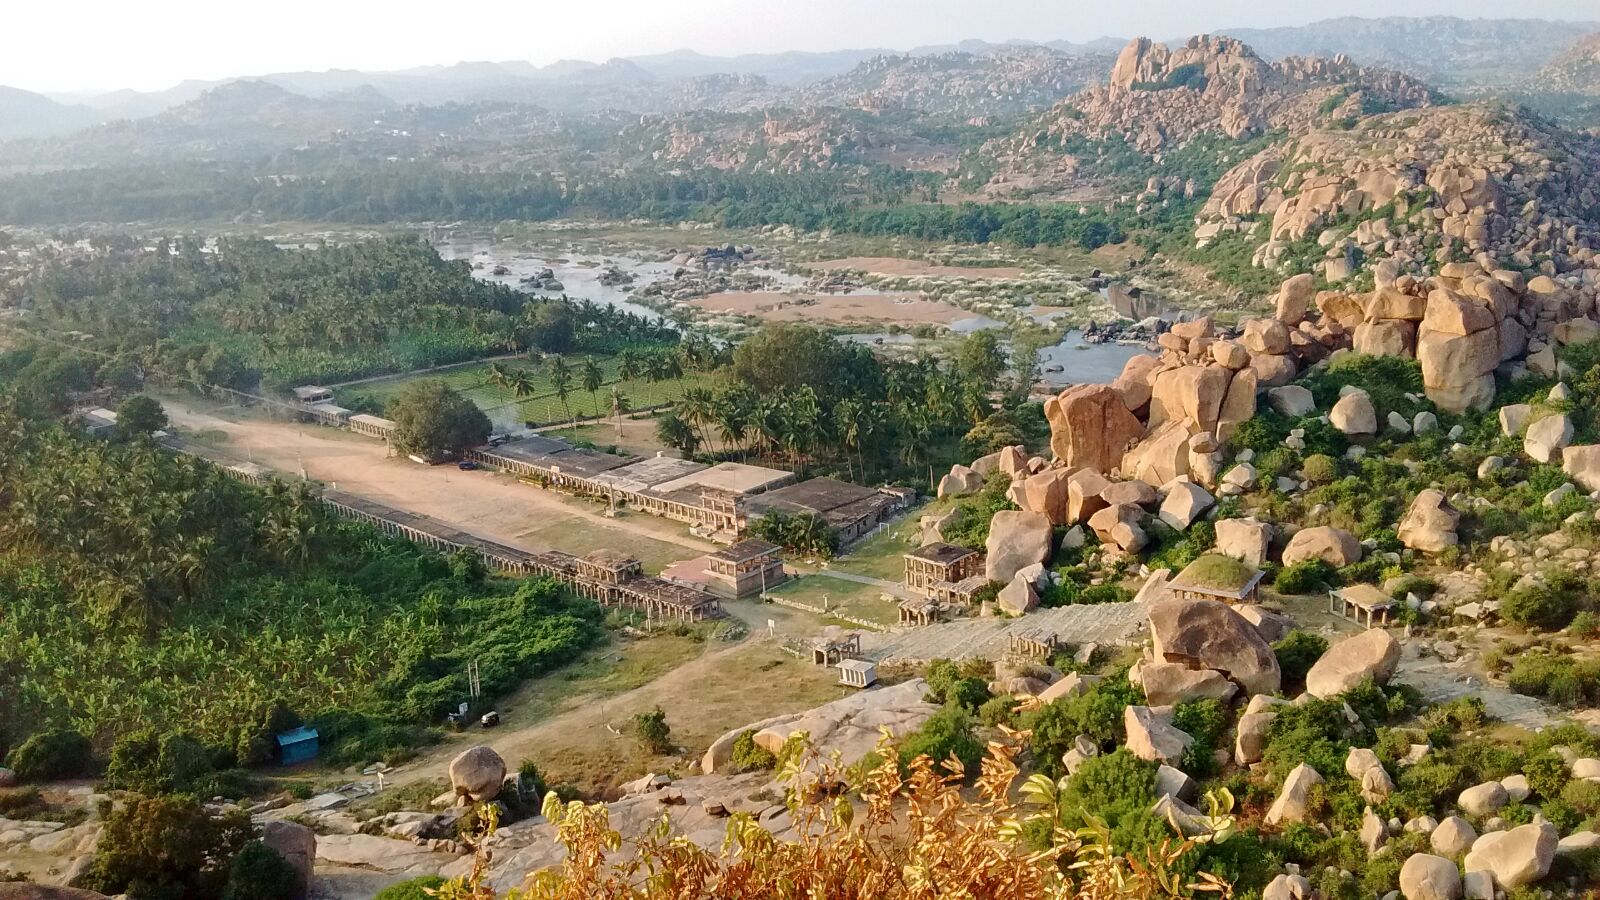 The view of the place from Matanga hill